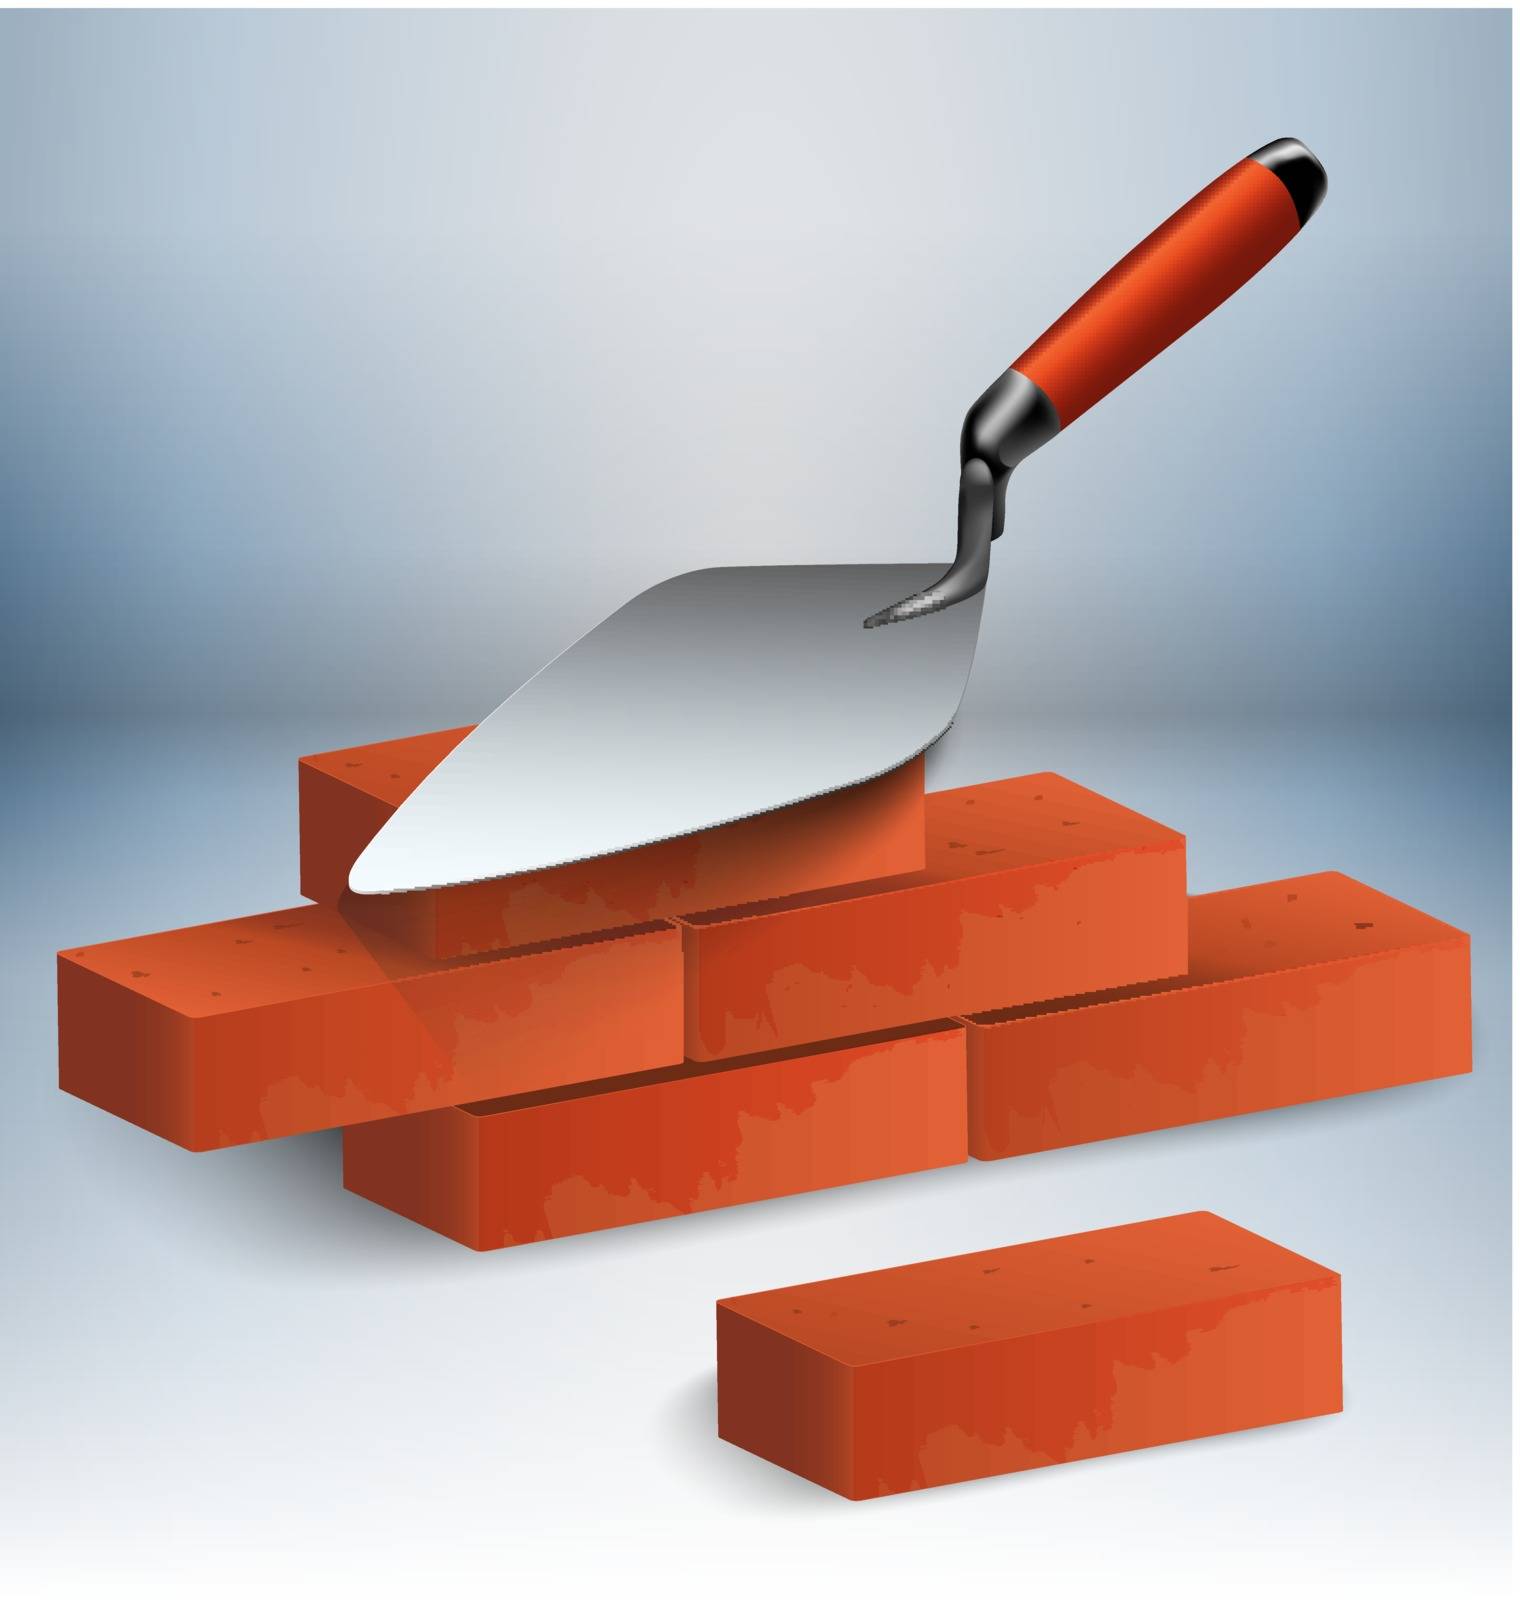 Trowel with a couple of bricks vector illustration